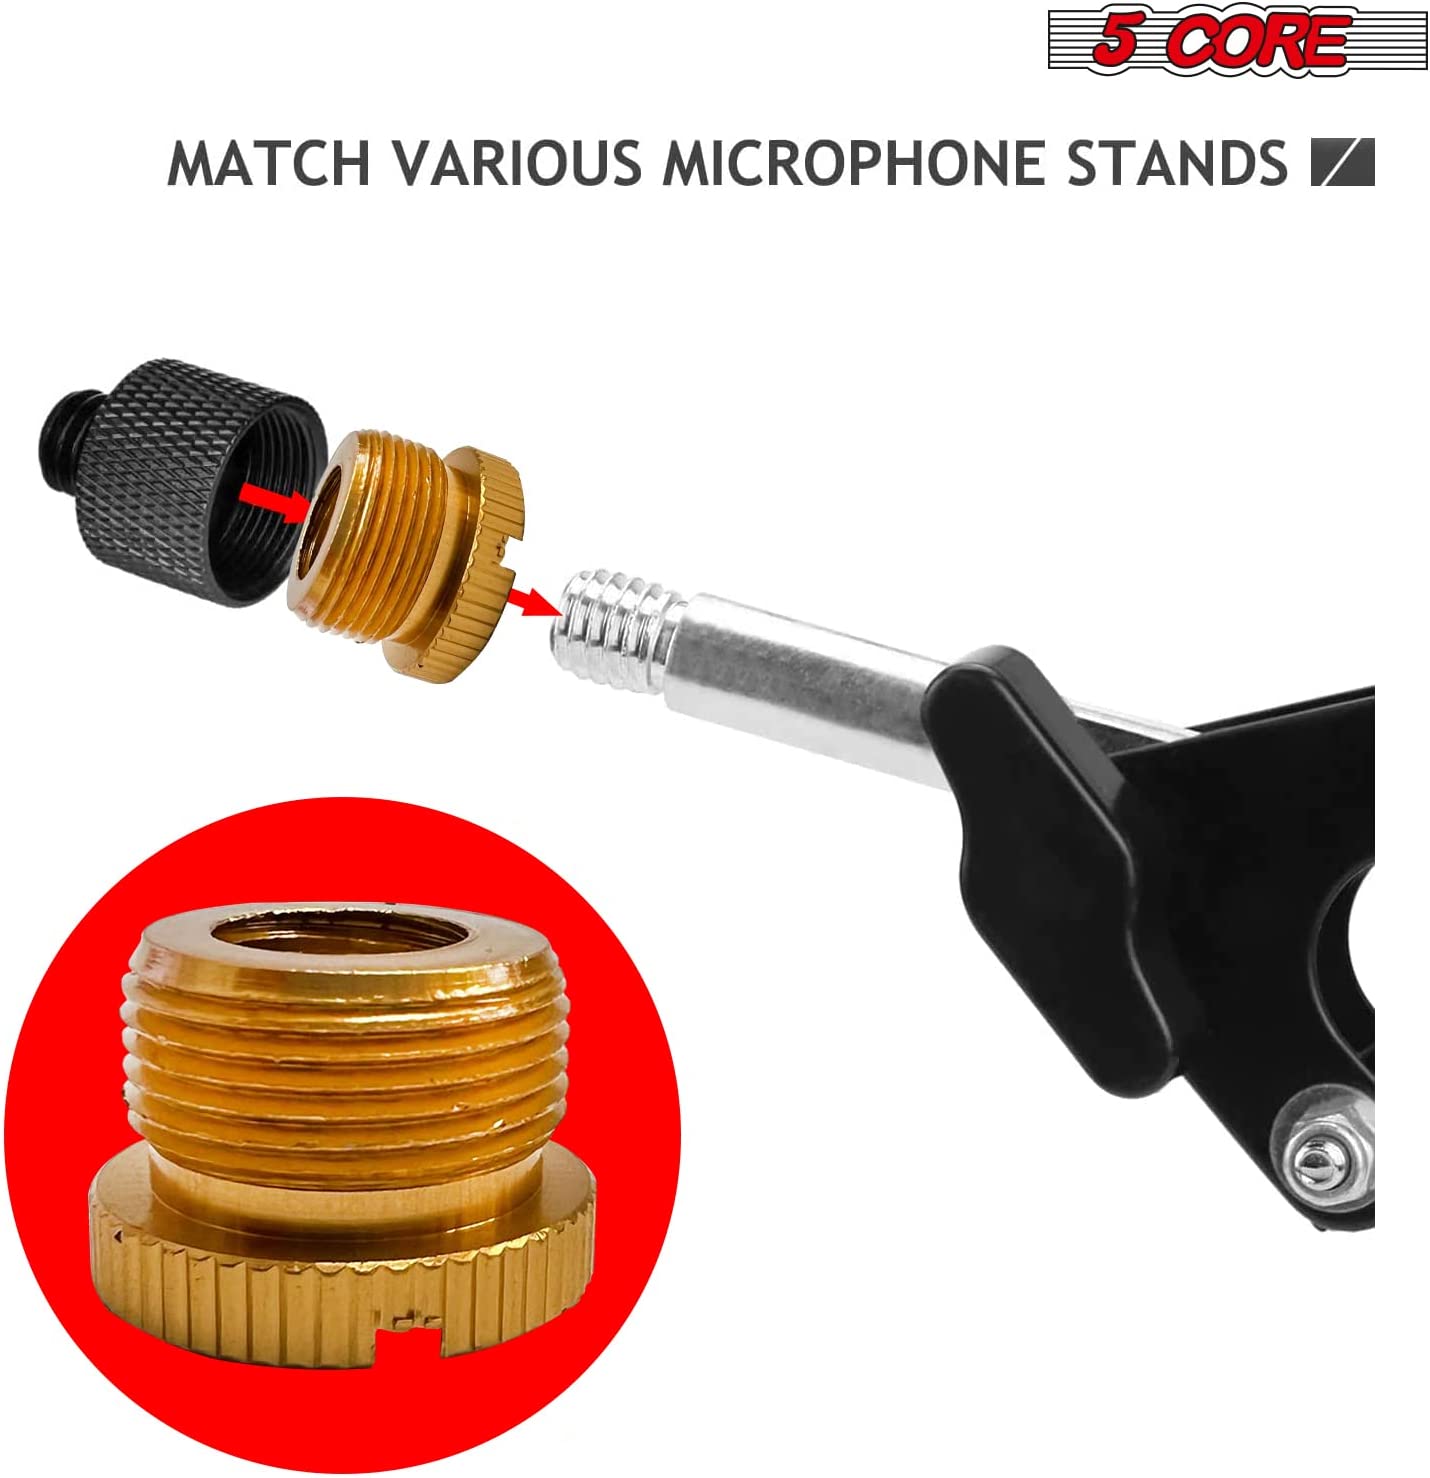 5 Core Mic Stand Adapter 4 Pieces Gold 3/8 Female to 5/8 Male Aluminum Mic Screw Adapter Gold Microphone Tripod Stand Screw - MS ADP M GLD 4PCS-4